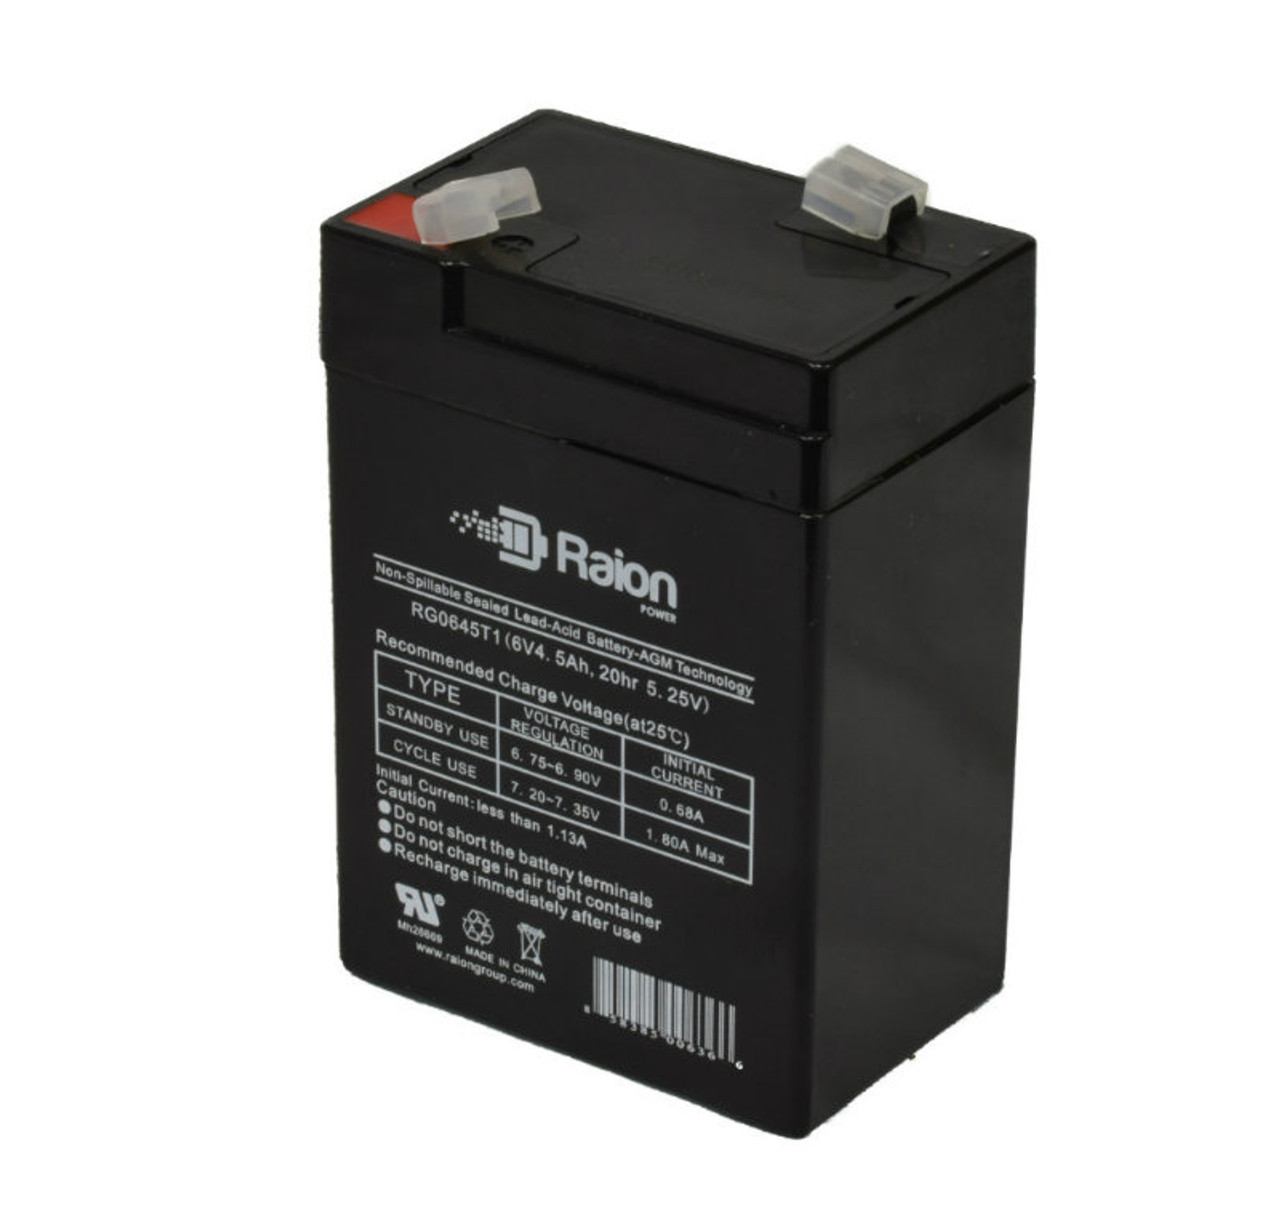 Raion Power RG0645T1 6V 4.5Ah Replacement Battery Cartridge for National NB6-5